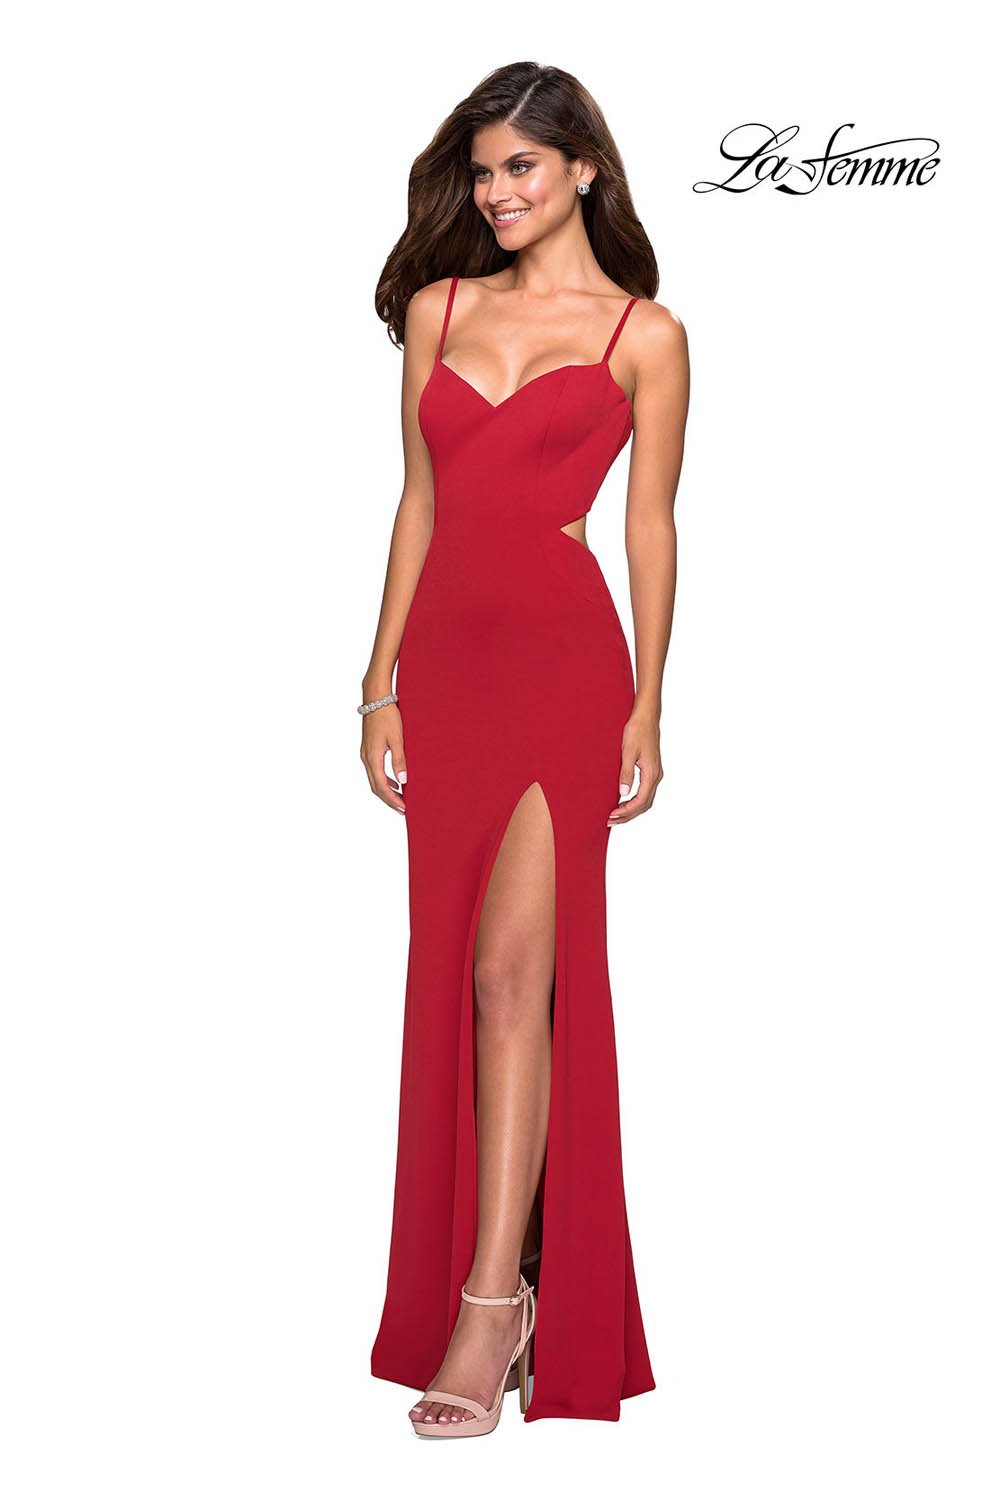 La Femme 27516 dress images in these colors: Deep Red, Plum, Royal Blue.